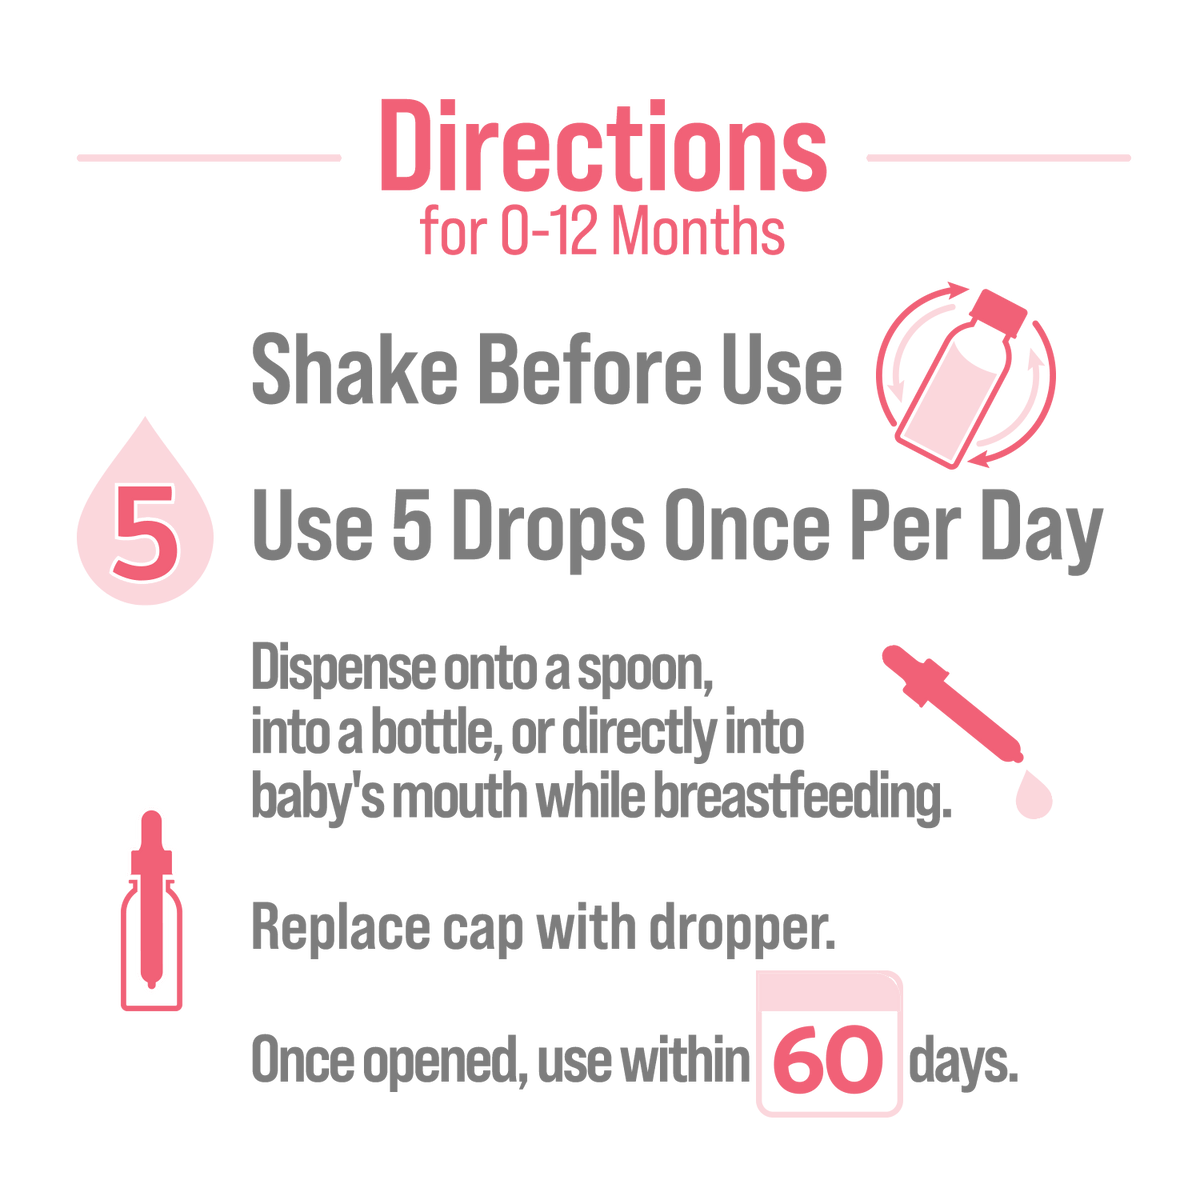 directions for 0-12 months. Shake before use, use 5 drops once per day. Dispense onto a spoon, into a bottle, or directly into baby's mouth while breastfeeding. Replace cap with dropper. Once opened, use within 60 days.